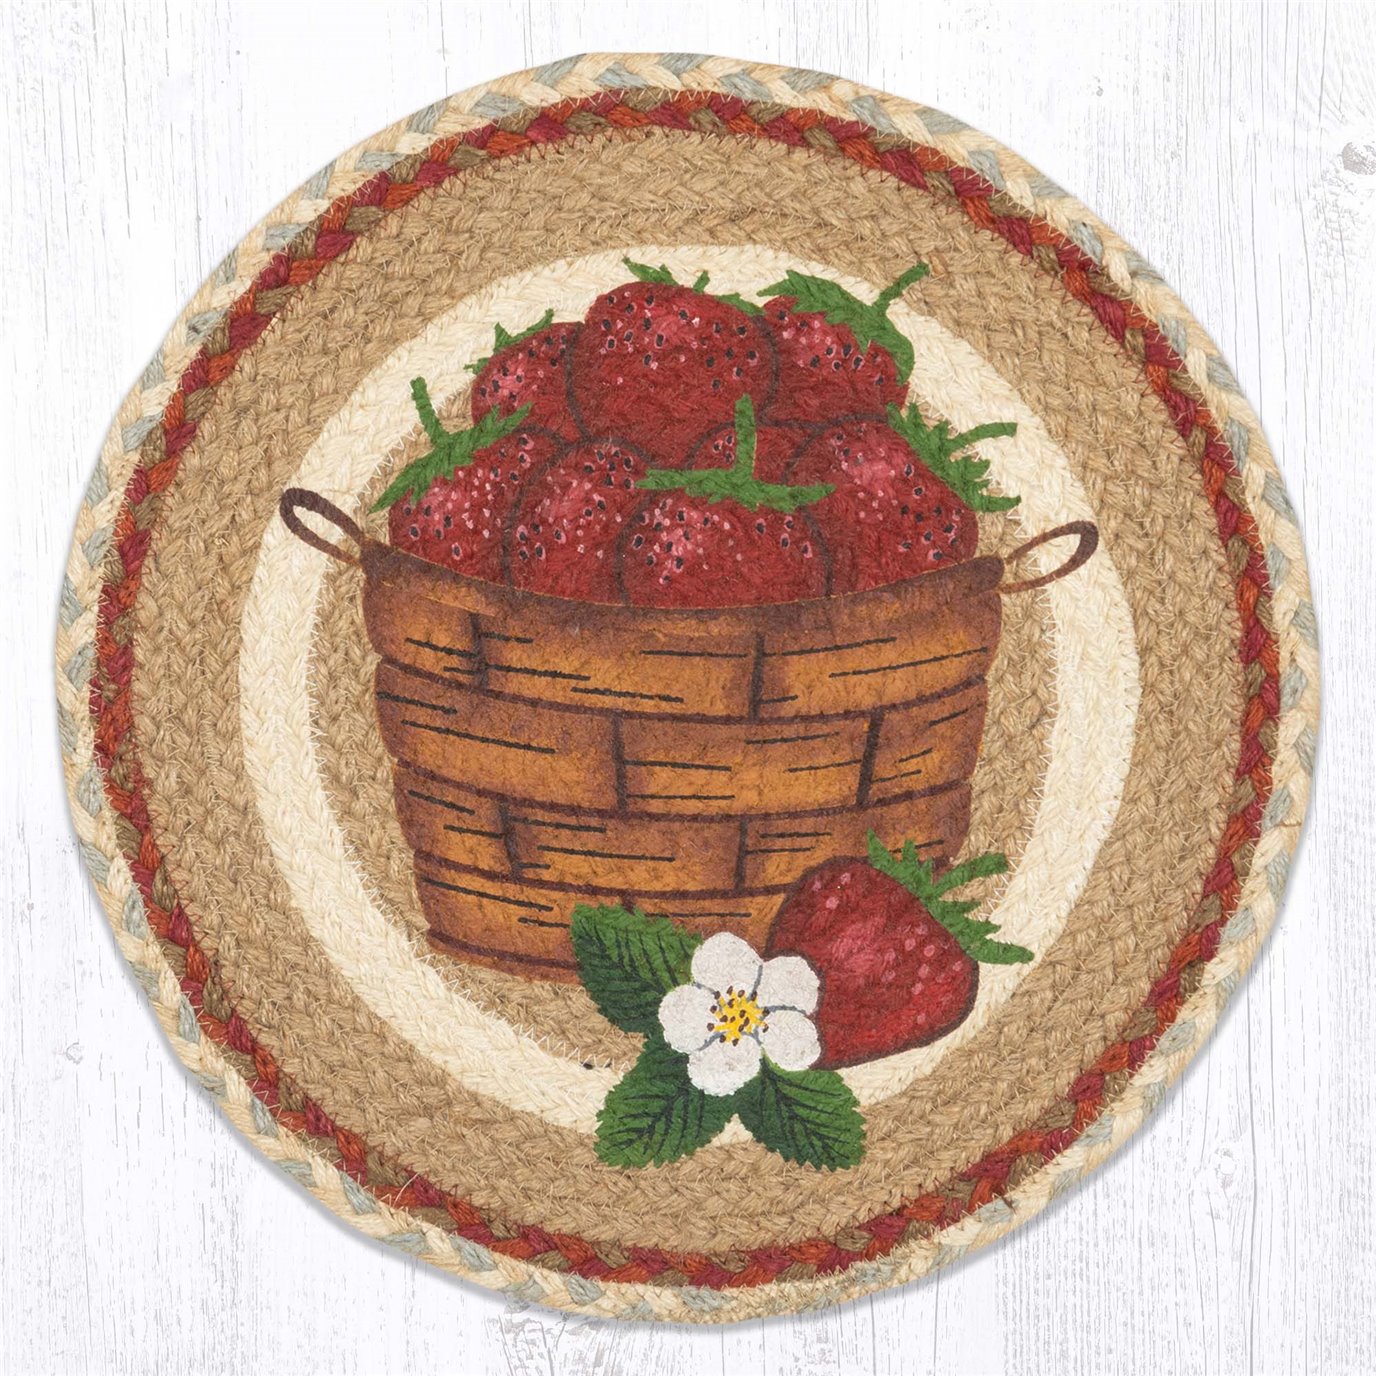 Strawberry Printed Round Placemat 15"x15"